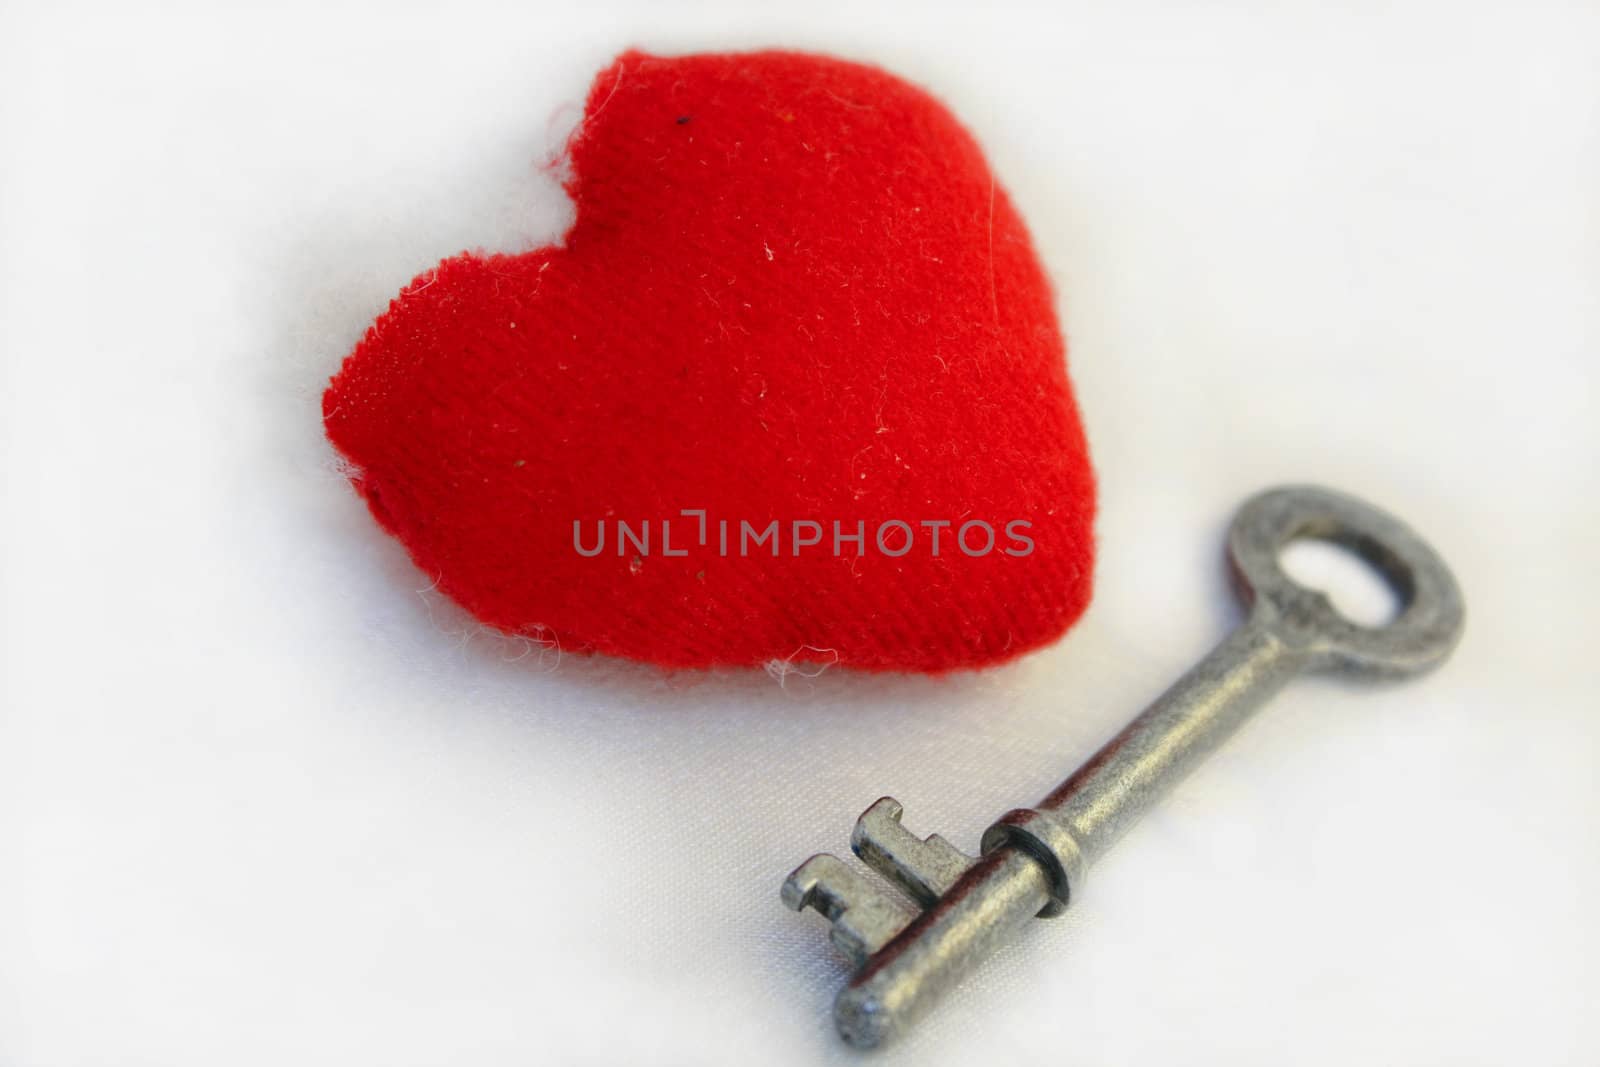 the key to the heart, red heart, to find love, open heart, to give the key to his heart, to give key, a symbol of love, success in love, pick up the key